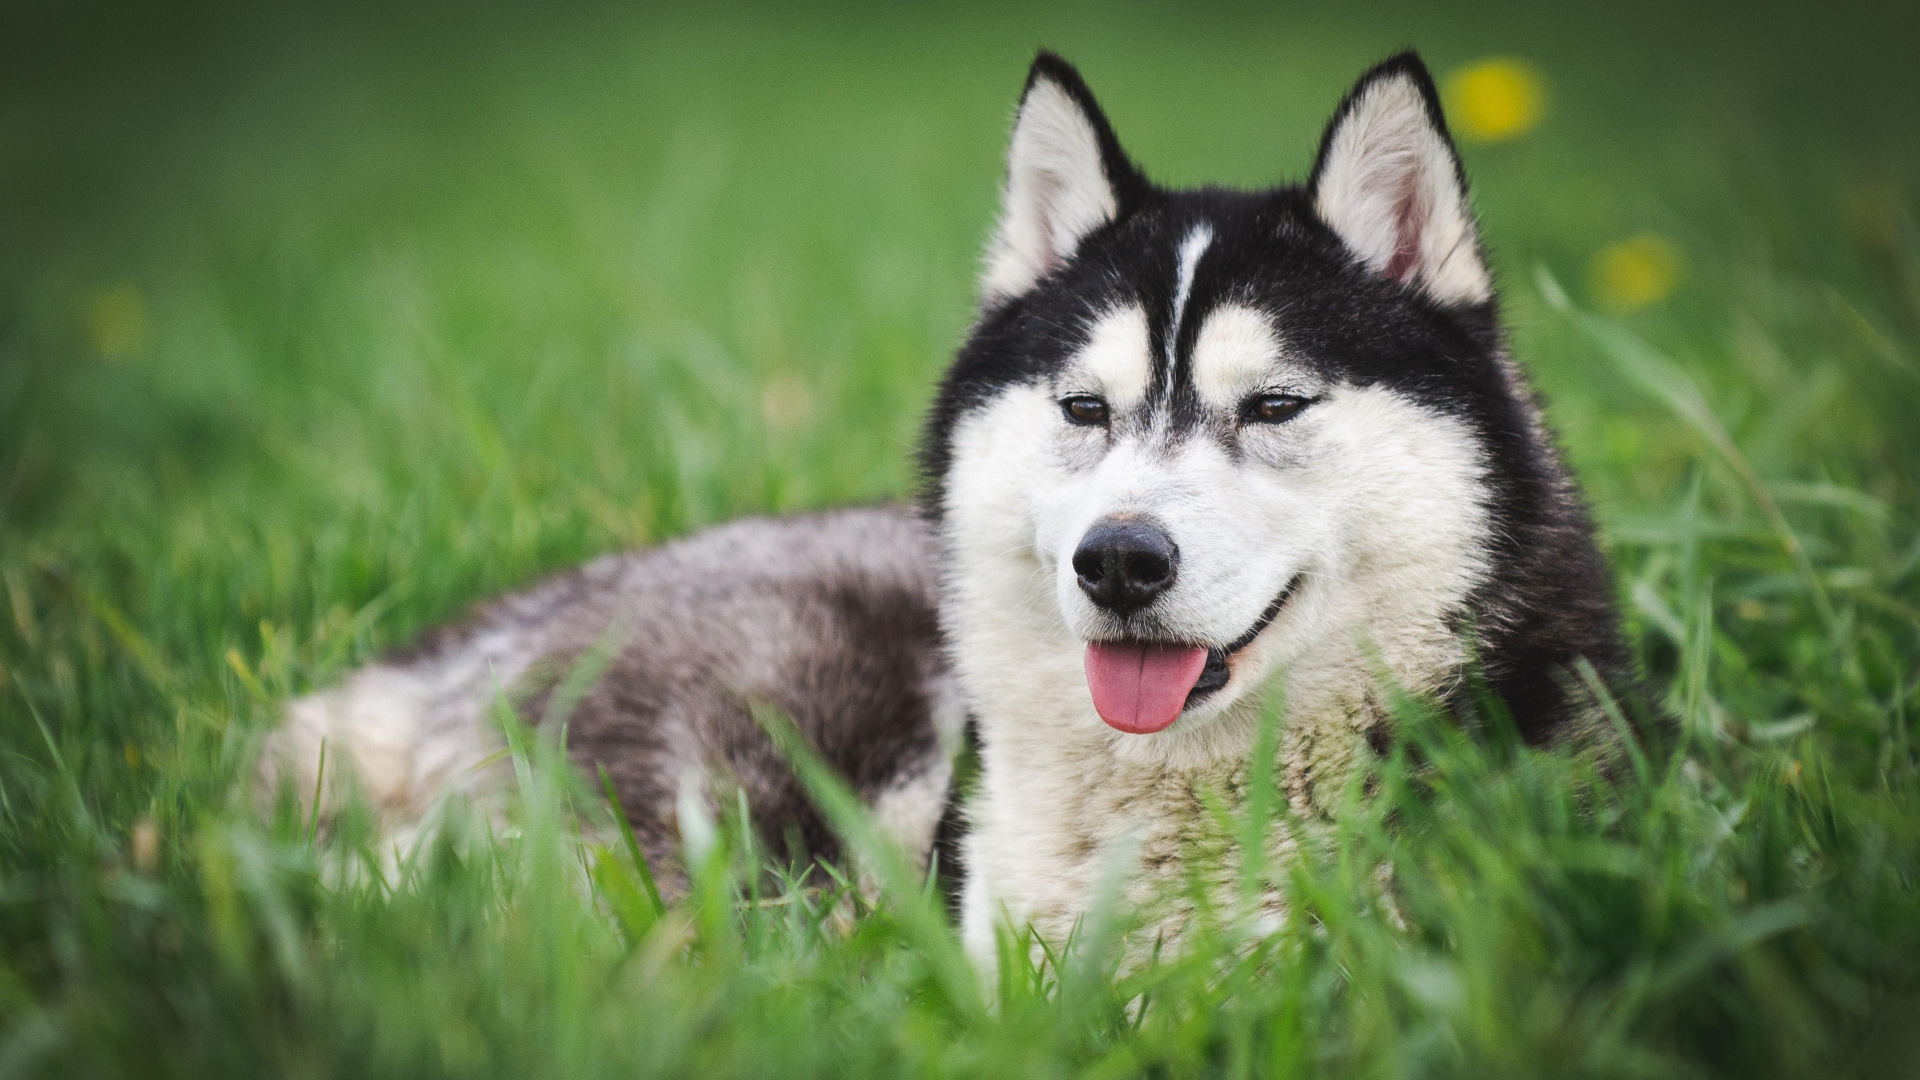 Black and White Siberian Husky on Green Grass Field During Daytime. Wallpaper in 1920x1080 Resolution